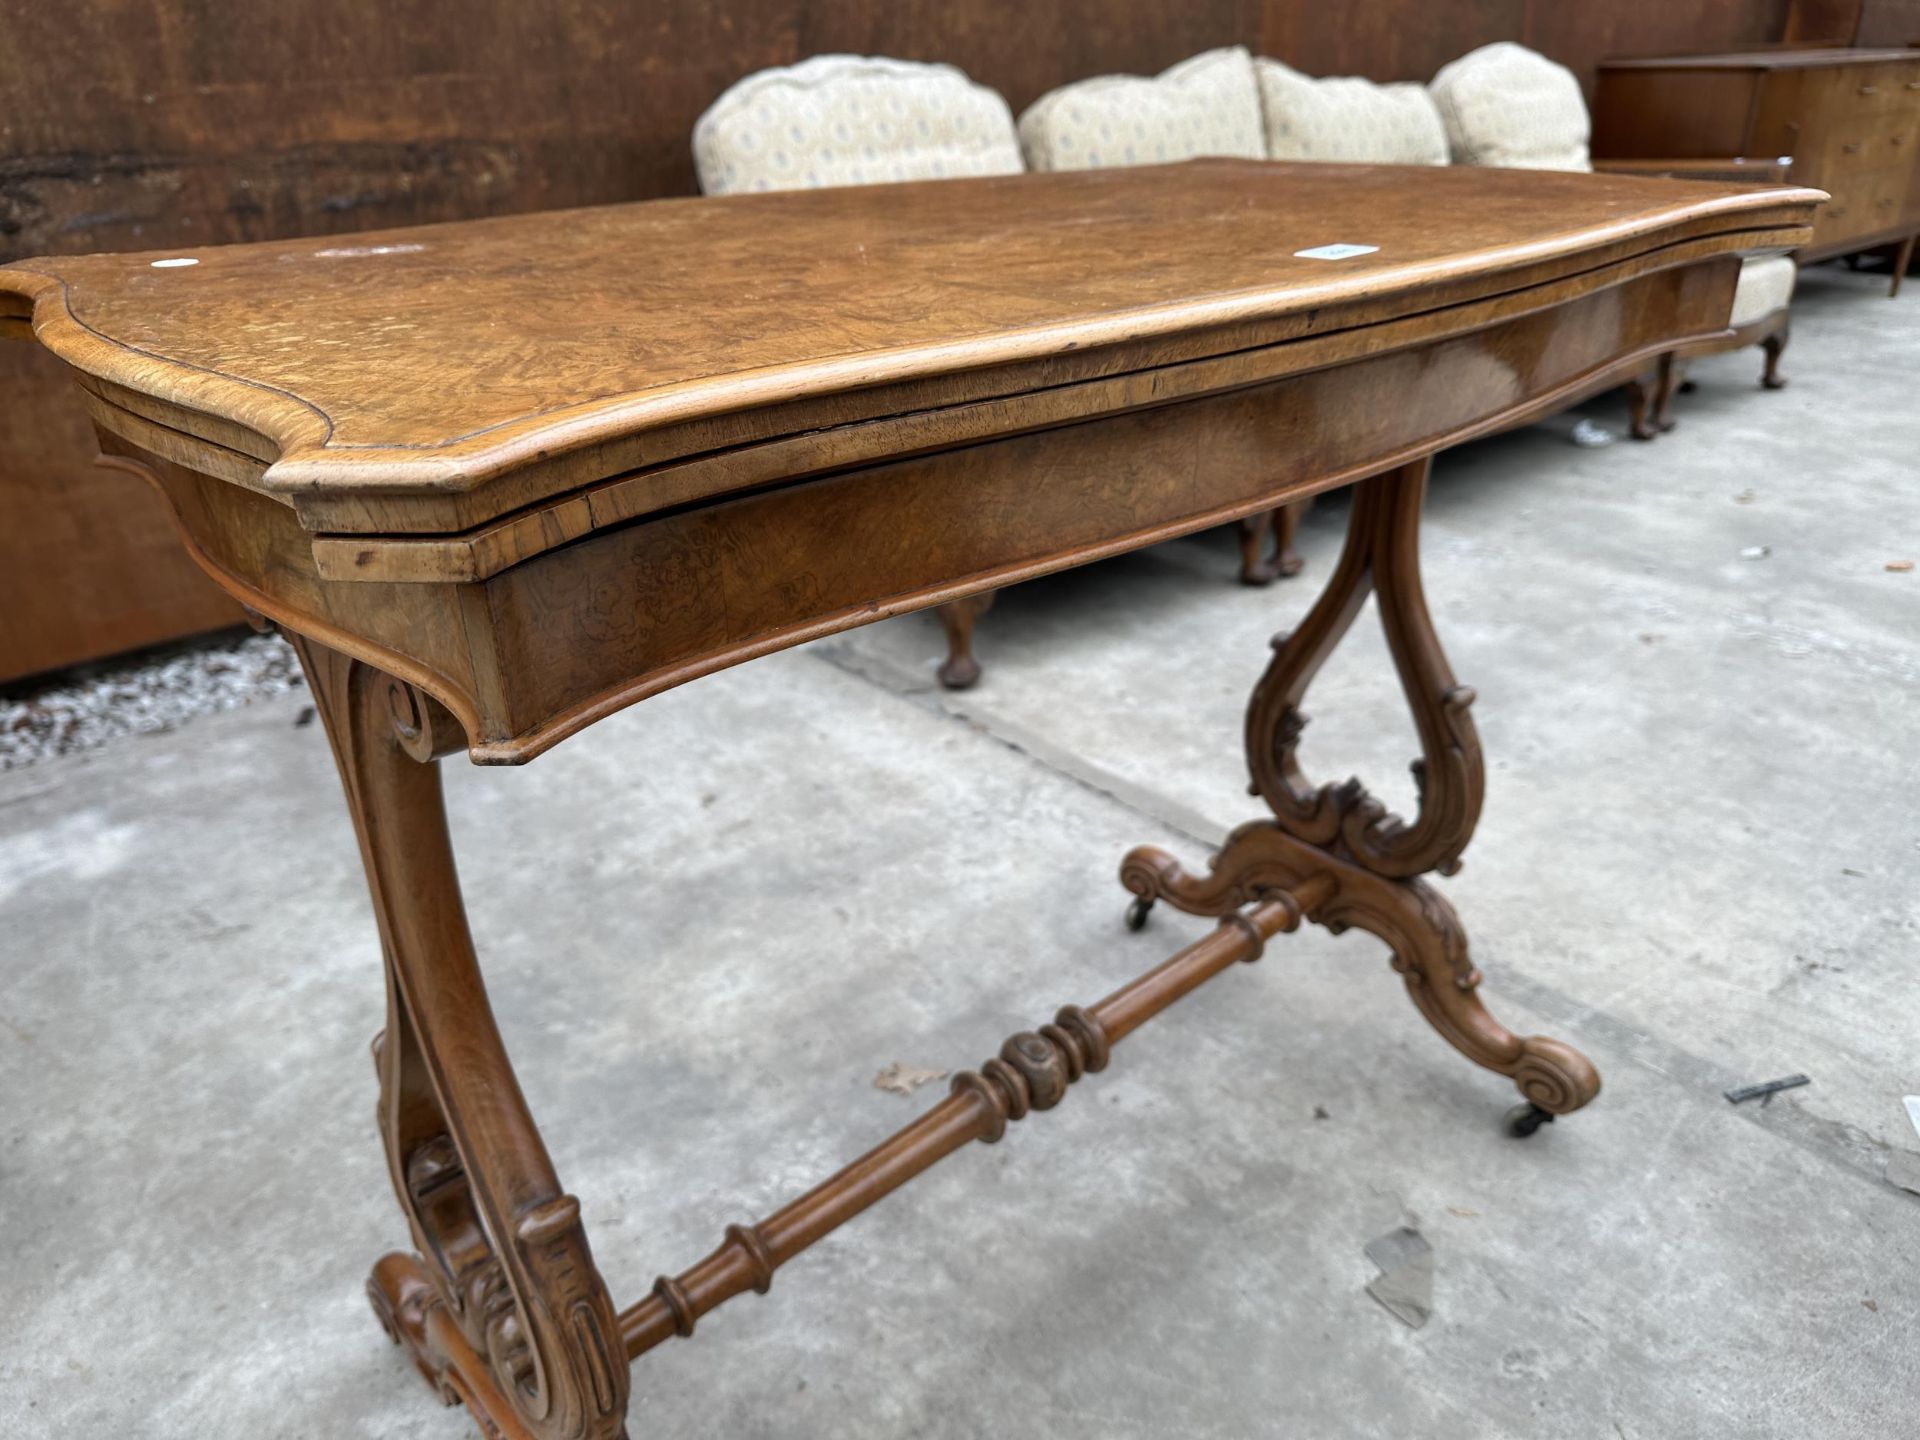 A VICTORIAN WALNUT FOLD OVER GAMES TABLE WITH LYRE SUPPORTS AND TURNED STRETCHER ON BRASS CASTERS - Image 3 of 6